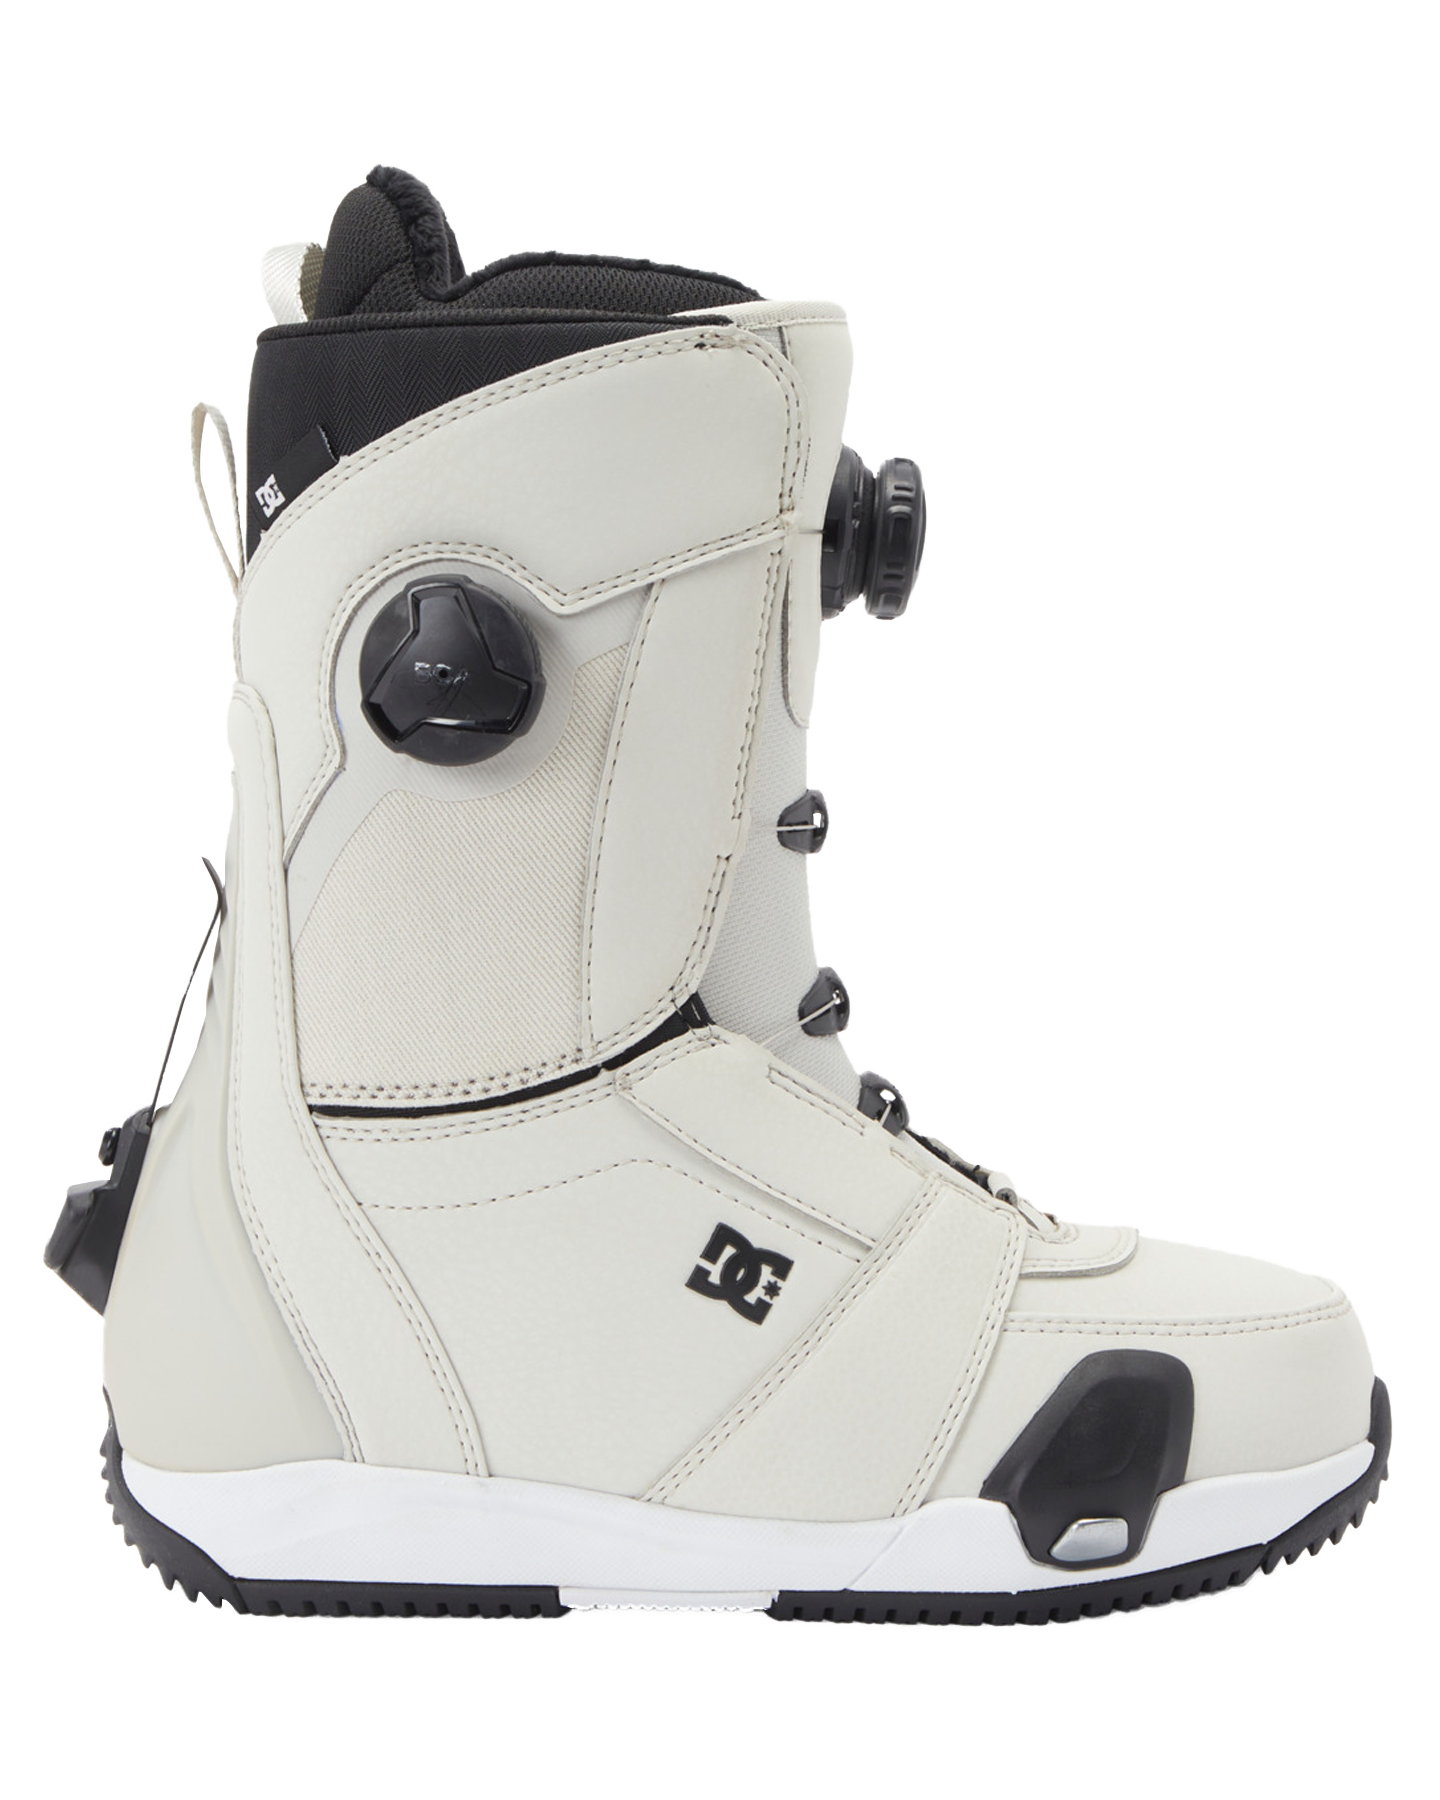 DC Women's Lotus Step On® Snowboard Boots - Silver Birch Snowboard Boots - Womens - SnowSkiersWarehouse